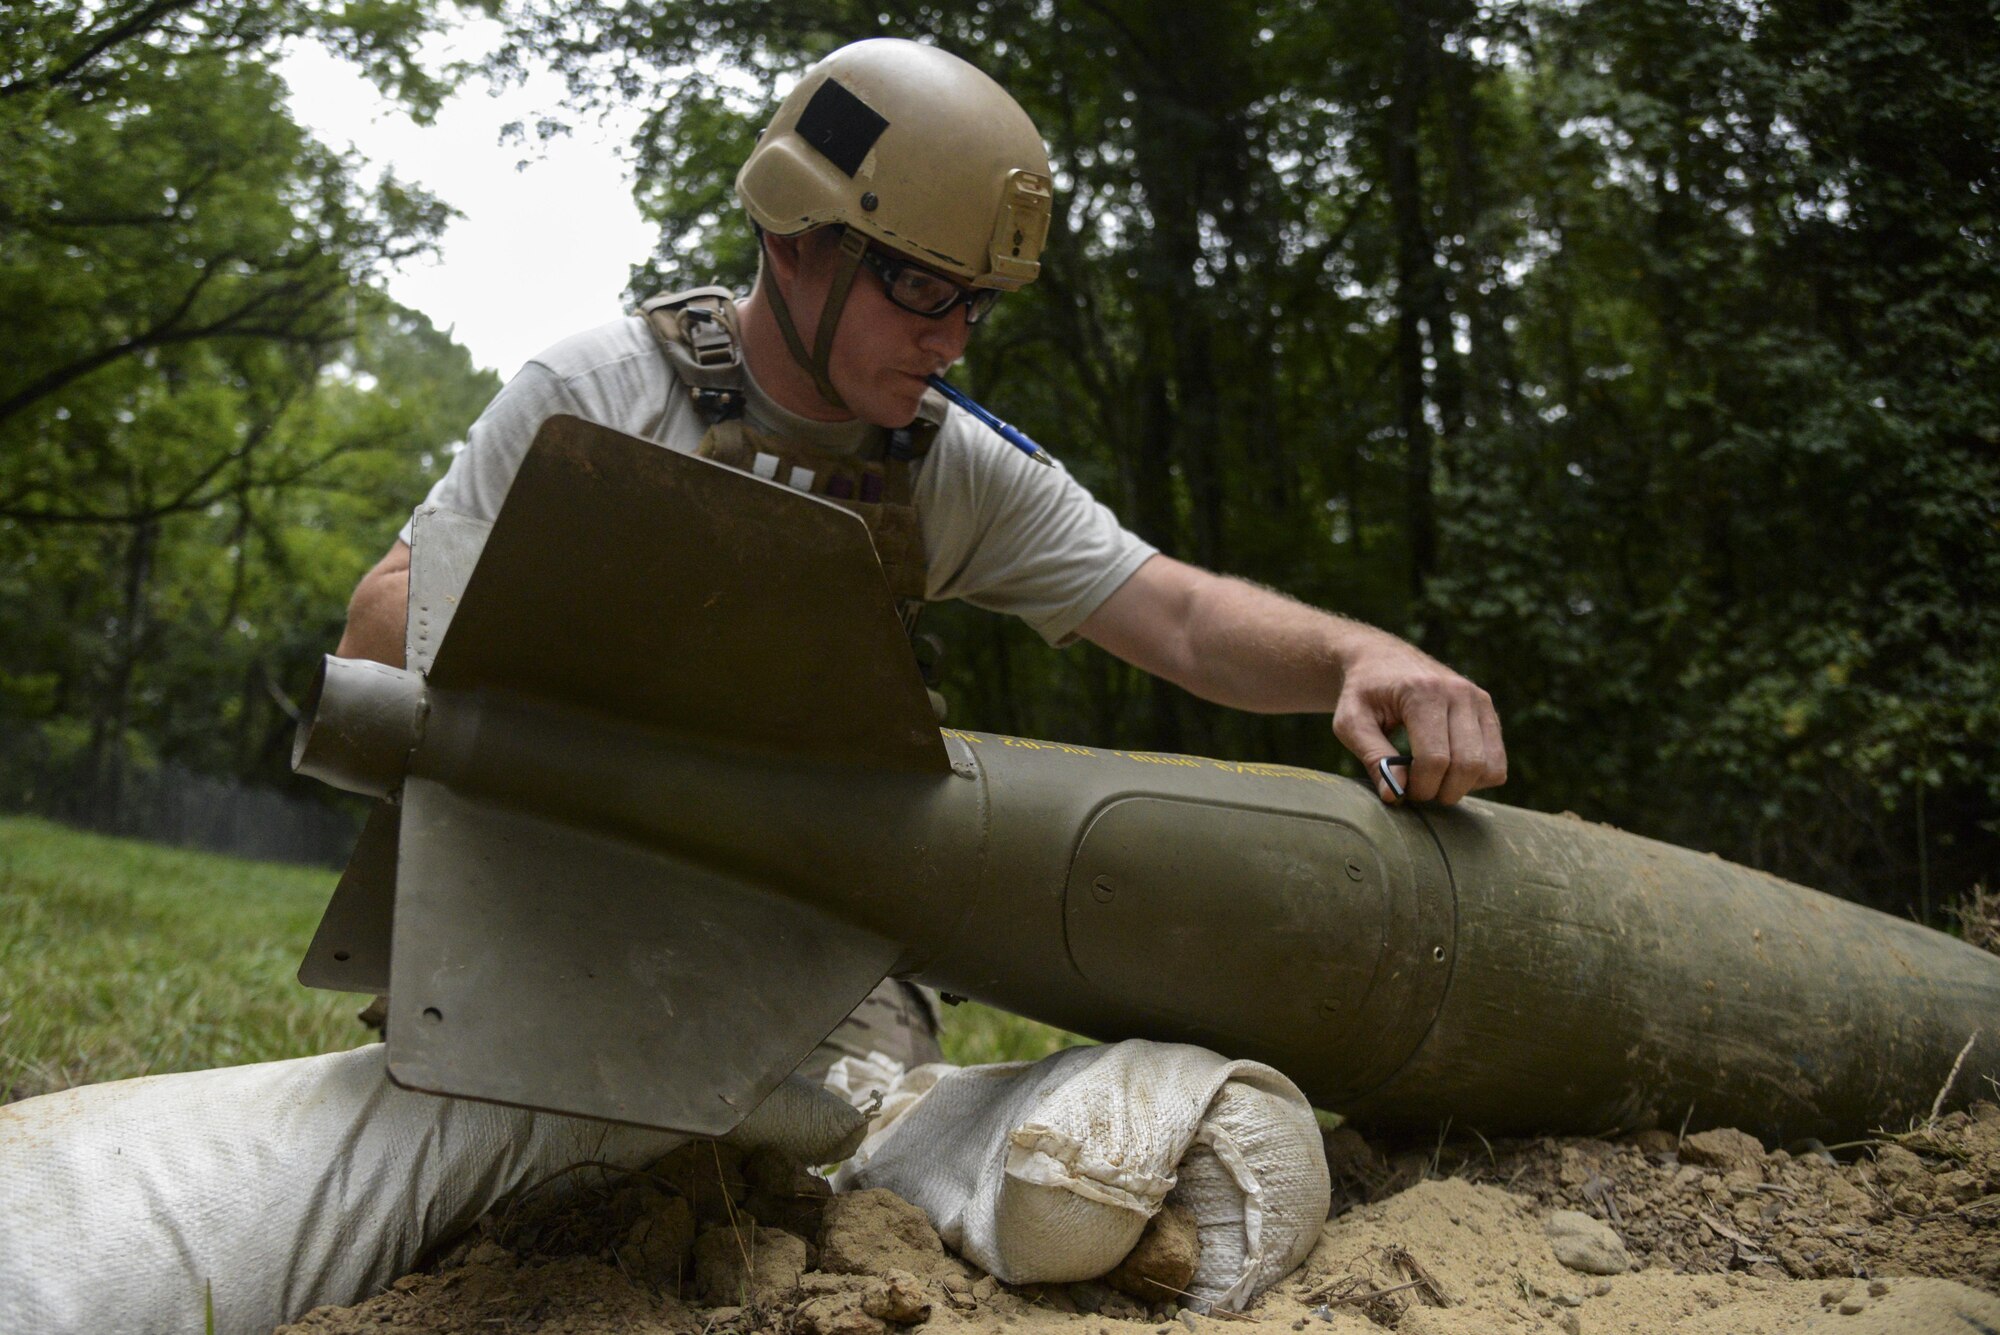 Staff Sgt. Alex Blair, an explosive ordnance disposal technician with the 11th Civil Engineer Squadron at Joint Base Andrews, Md., responds to an unexploded ordnance threat as part of Operation Llama Fury, Aug. 26, 2015, at Seymour Johnson Air Force Base, N.C. During the scenario, Blair and his team removed a nose and tail fuse from the UXO as well as the firing pin in order to render the munition safe. (U.S. Air Force photo/Senior Airman Brittain Crolley)